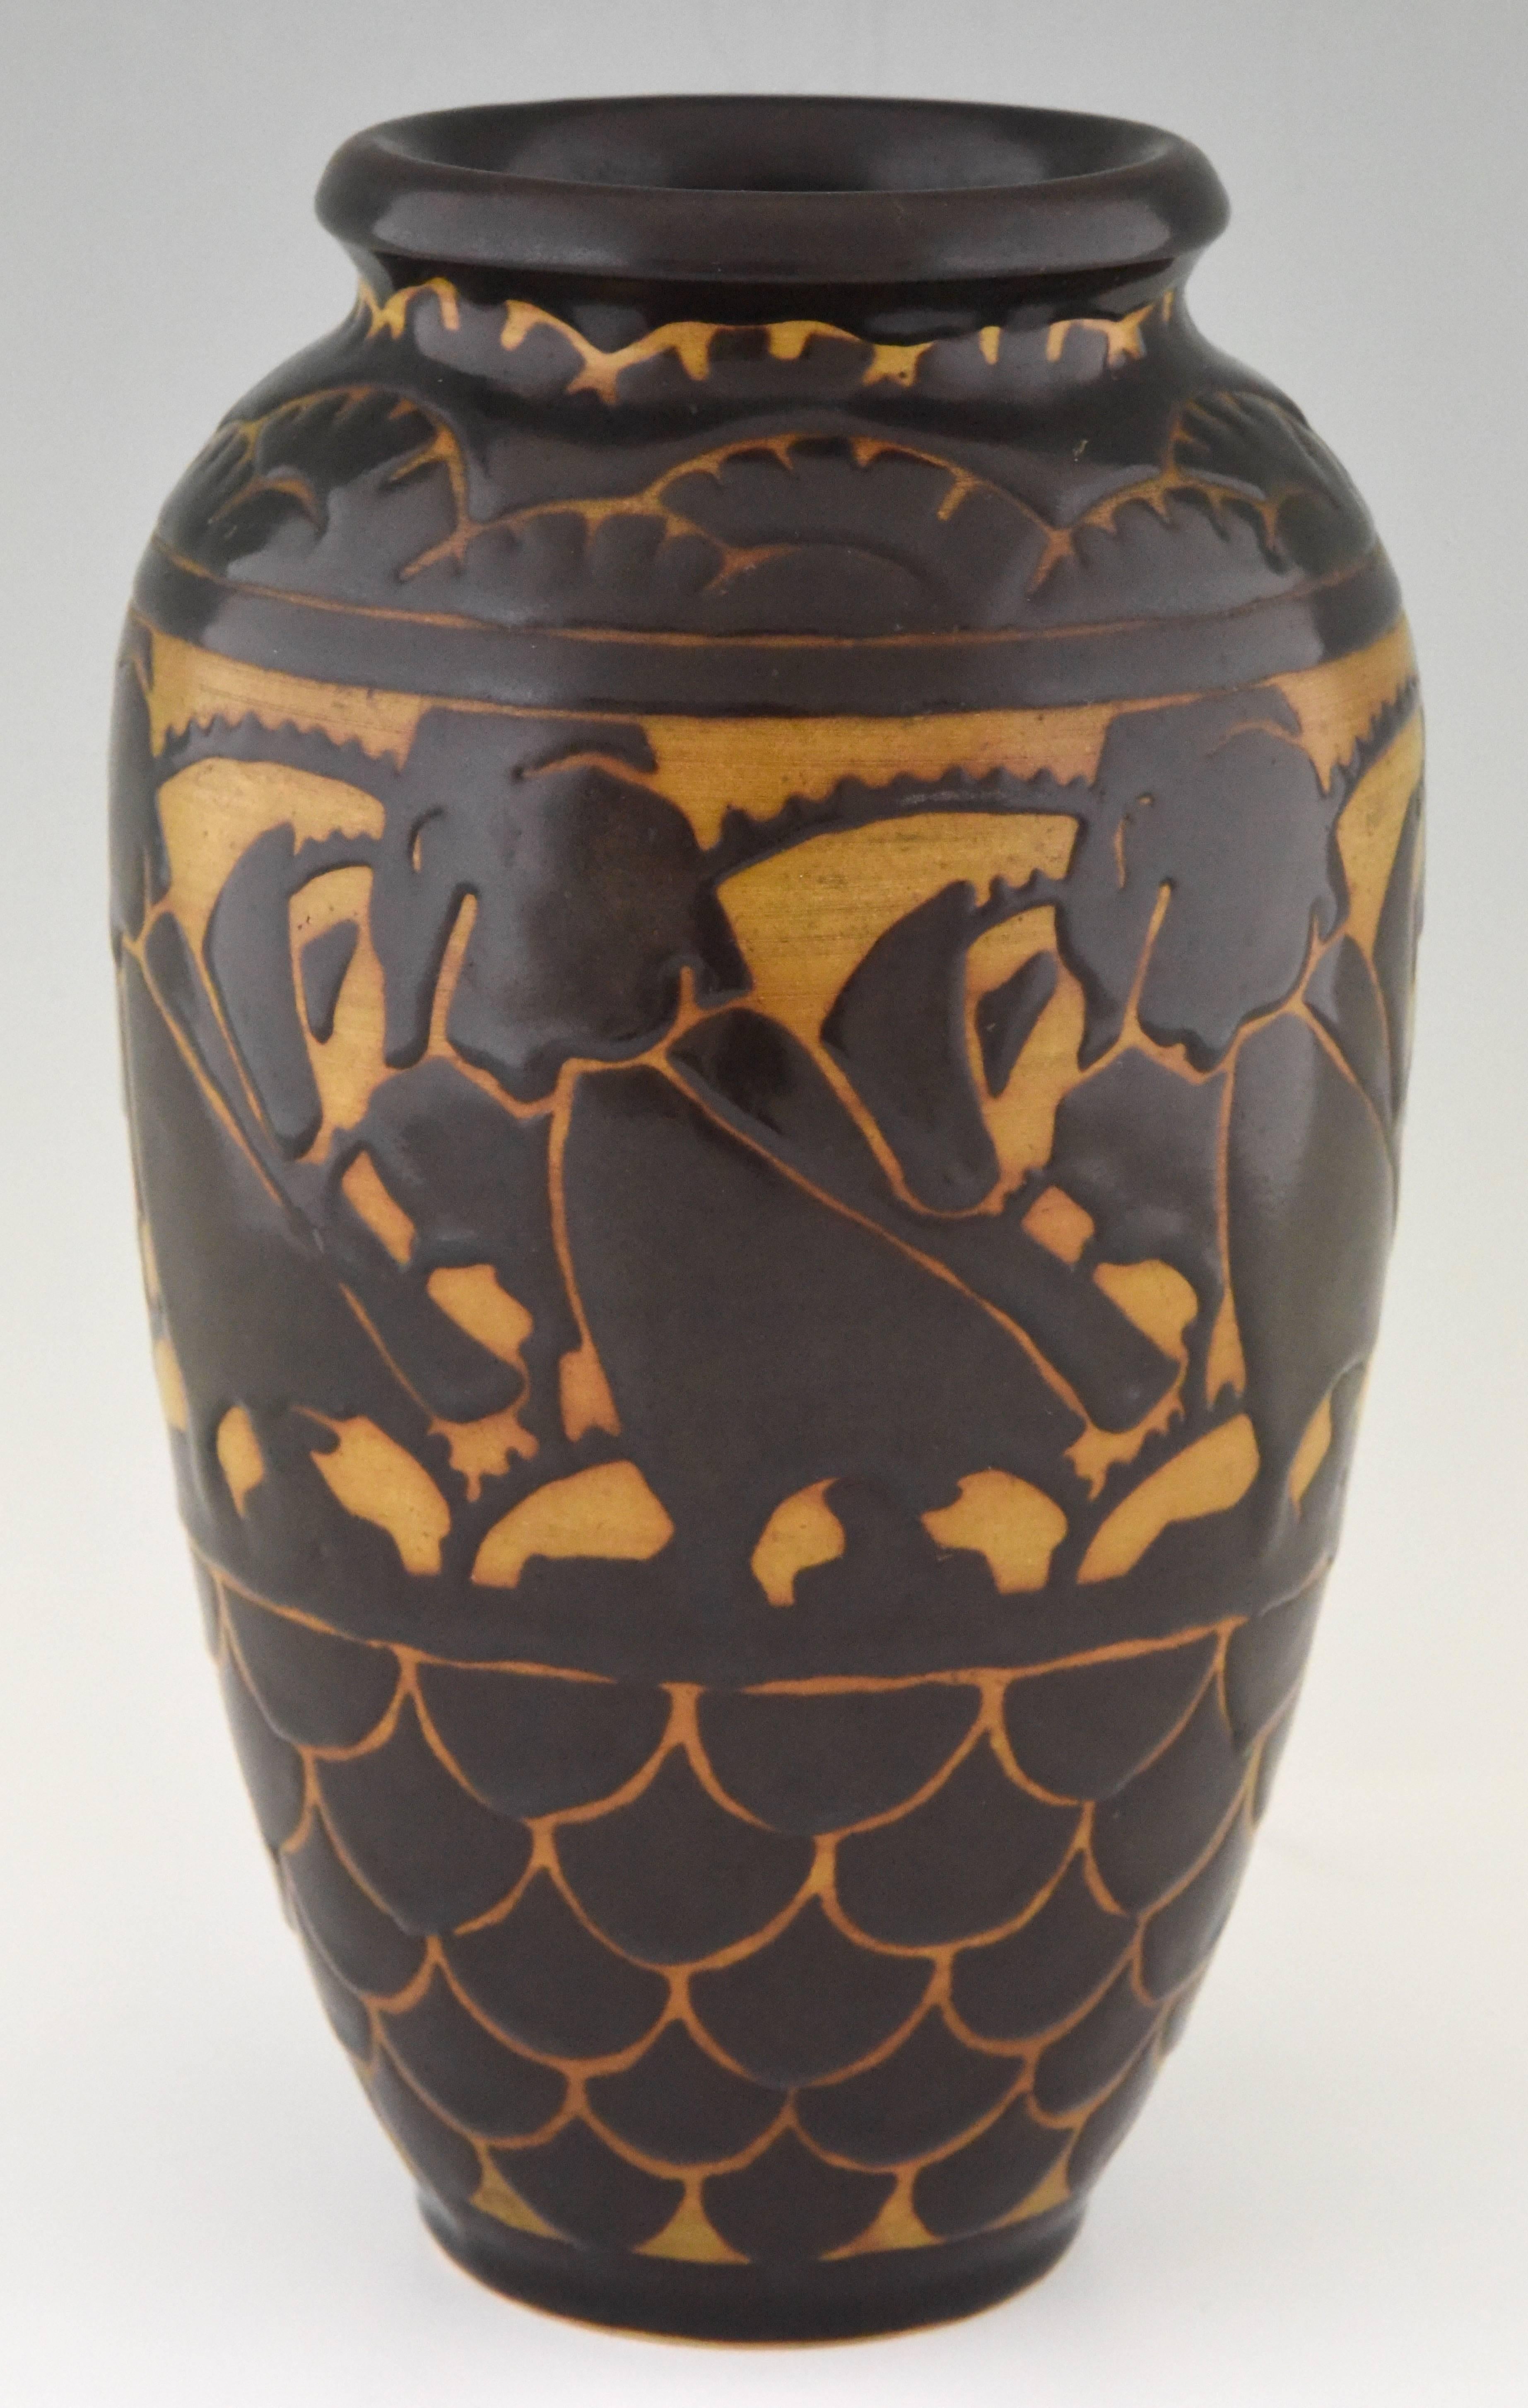 Belgian Art Deco Ceramic Vase with Stylized Birds by Charles Catteau for Keramis, 1925